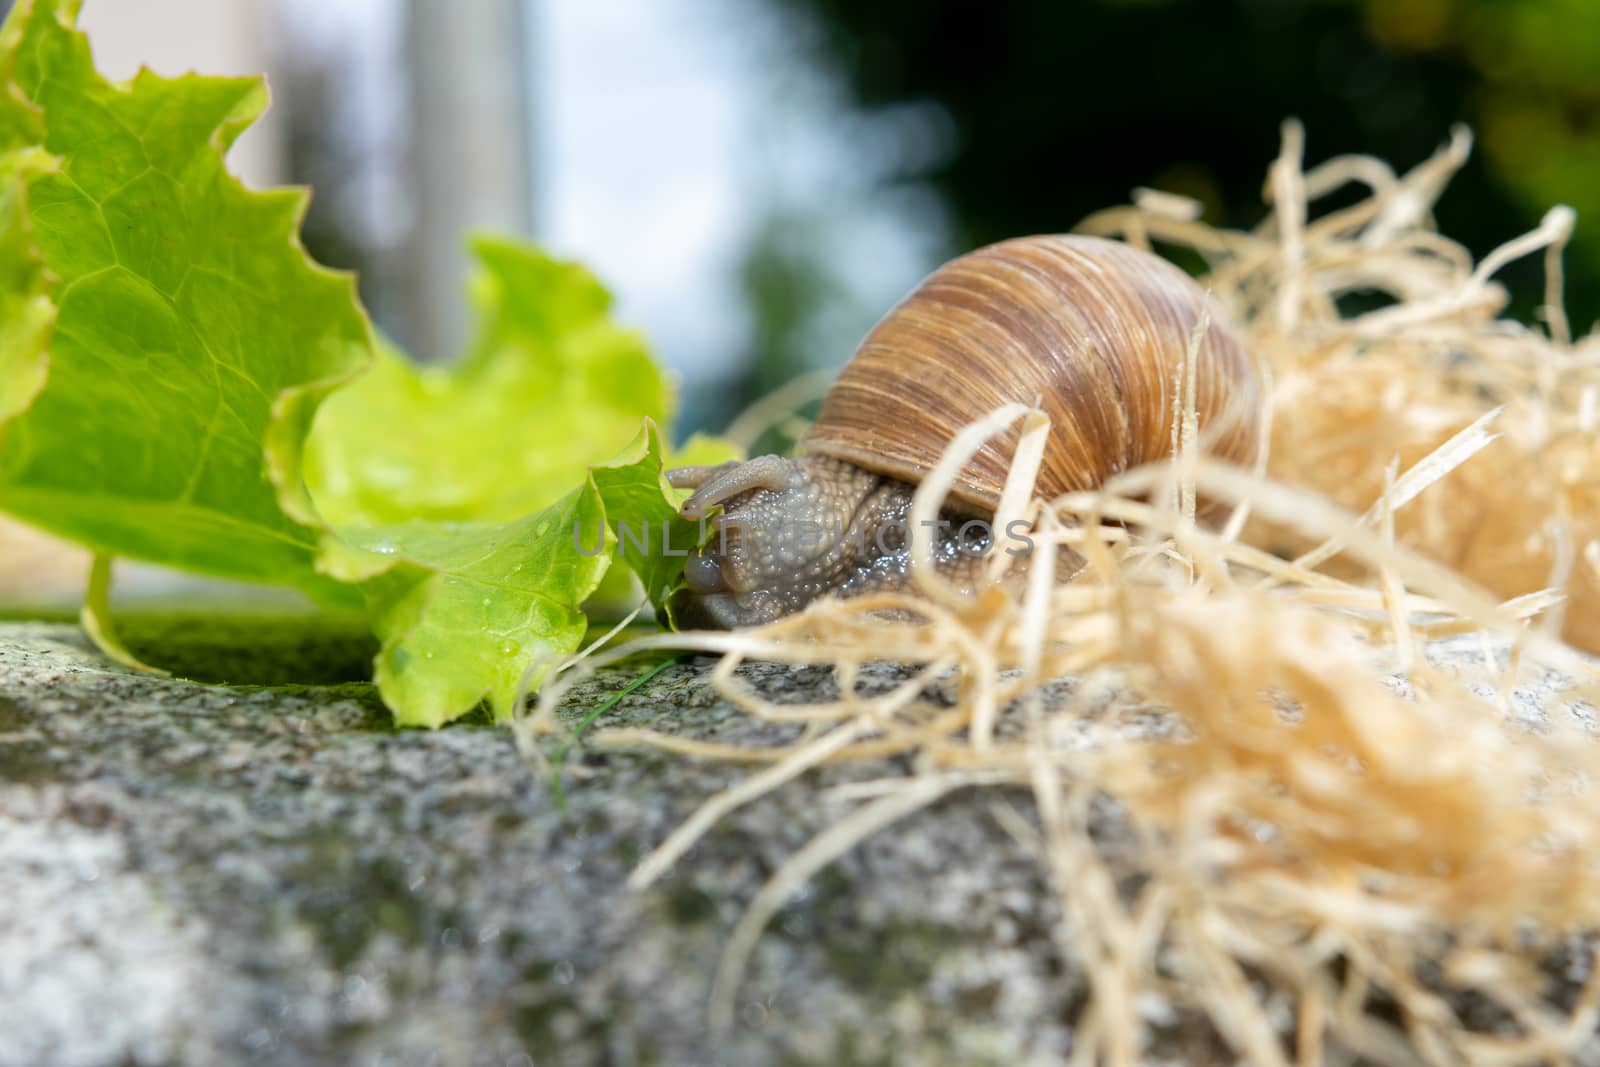 Macro close-up of a Burgundy snail pulling a lettuce leaf with her Radula into her mouth by Umtsga